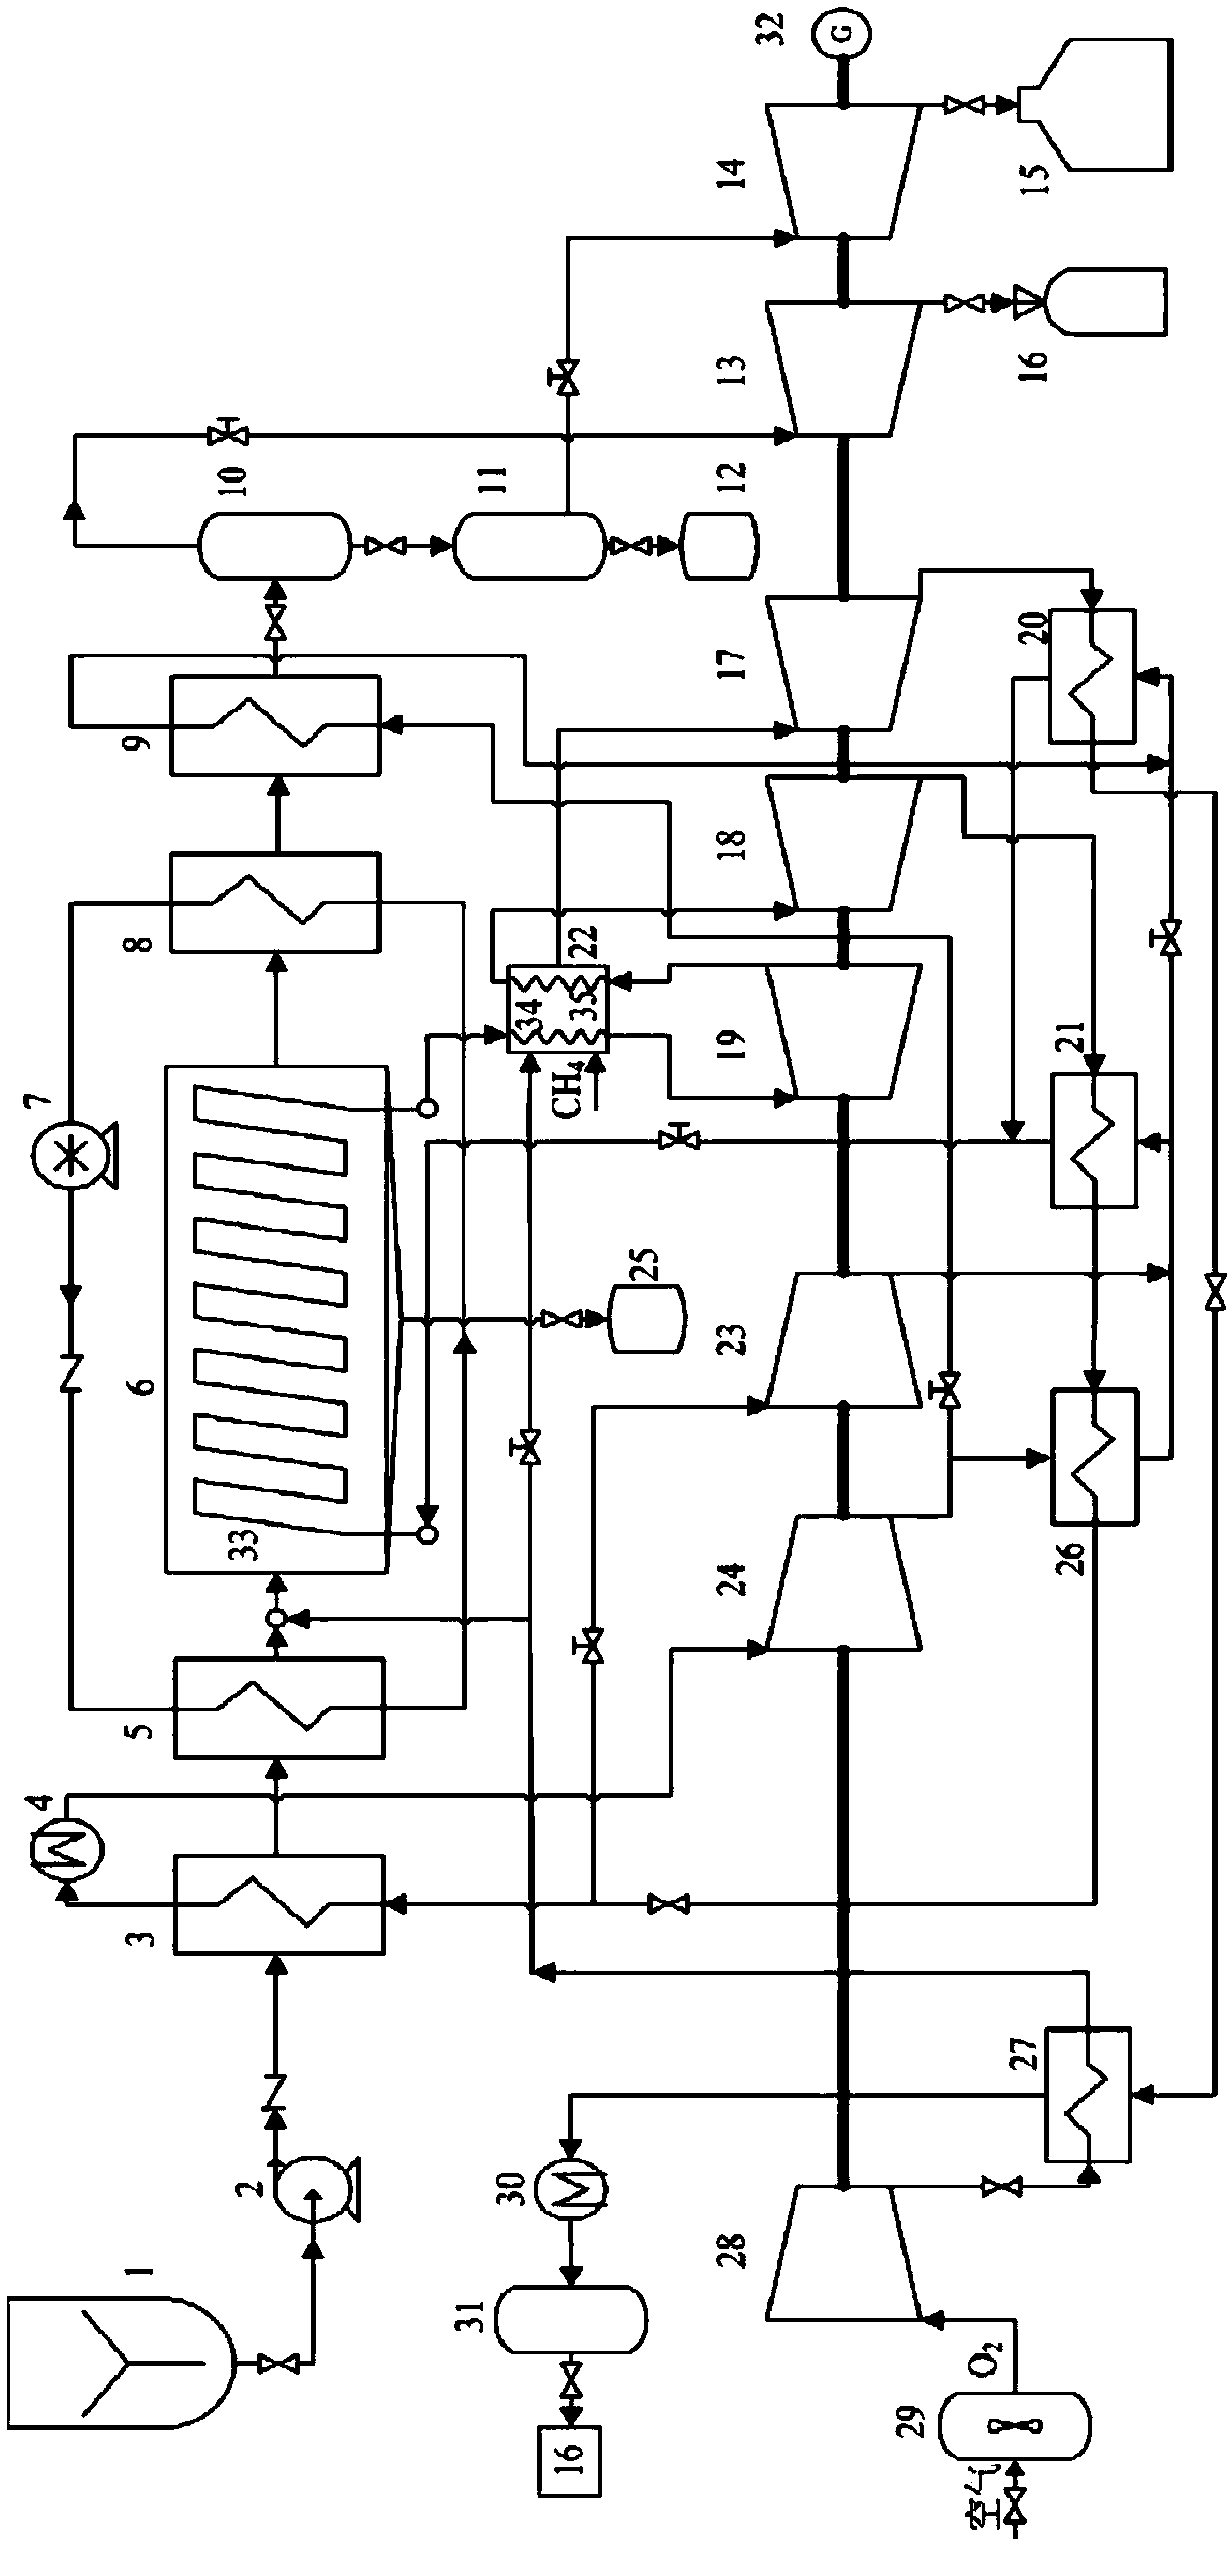 Power generation system with supercritical water thermal combustion of coal and supercritical carbon dioxide cycle coupled